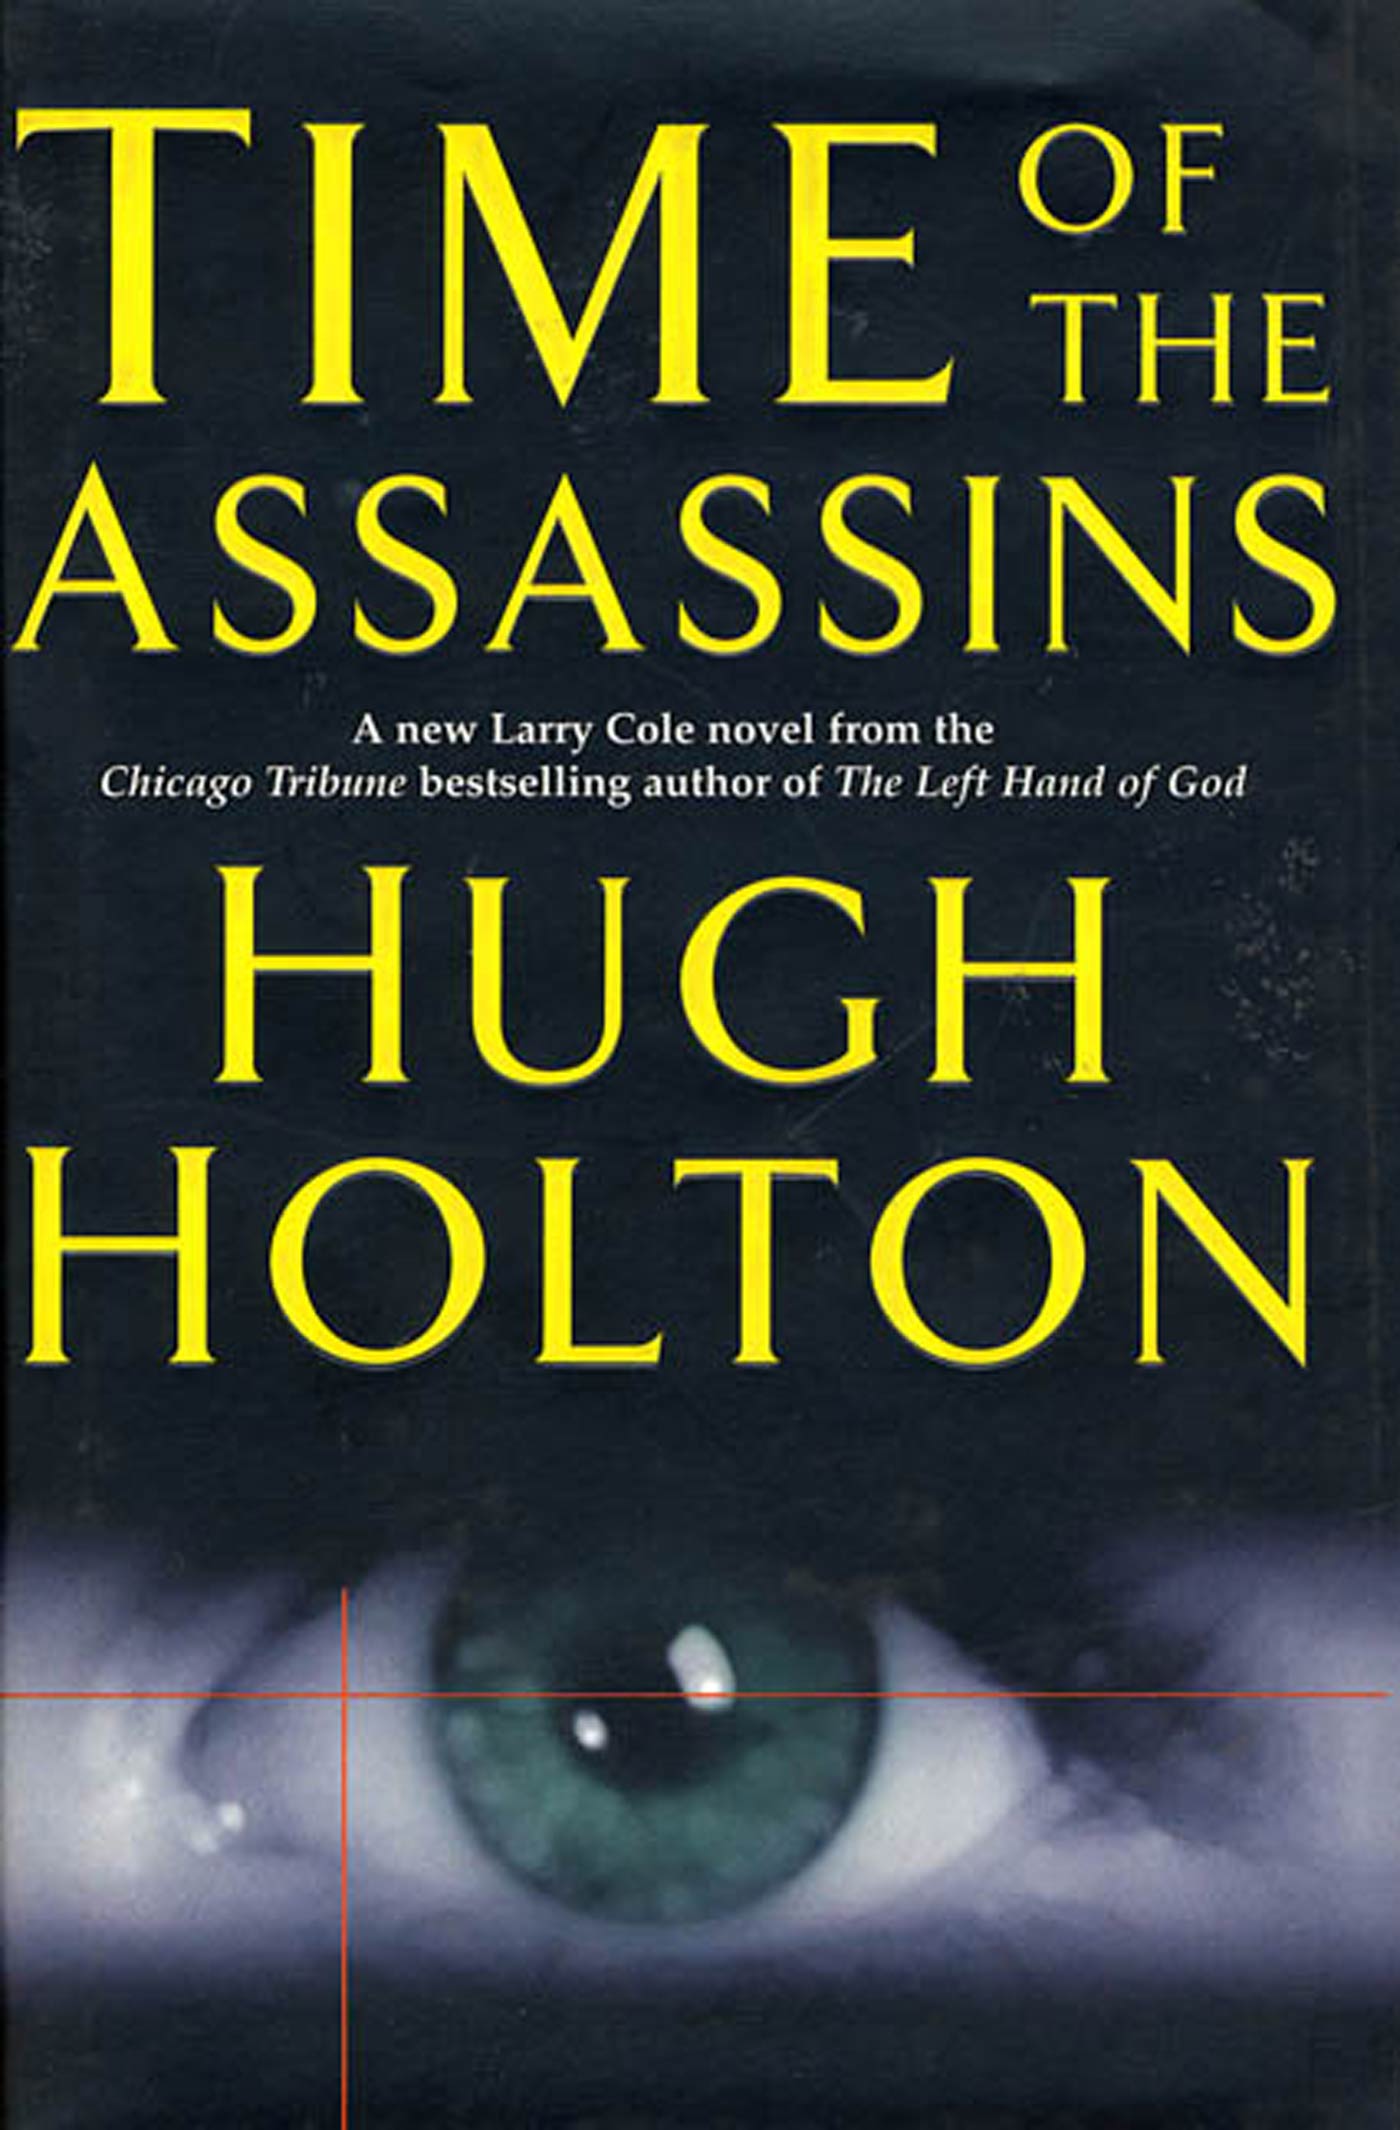 Time of the Assassins by Hugh Holton